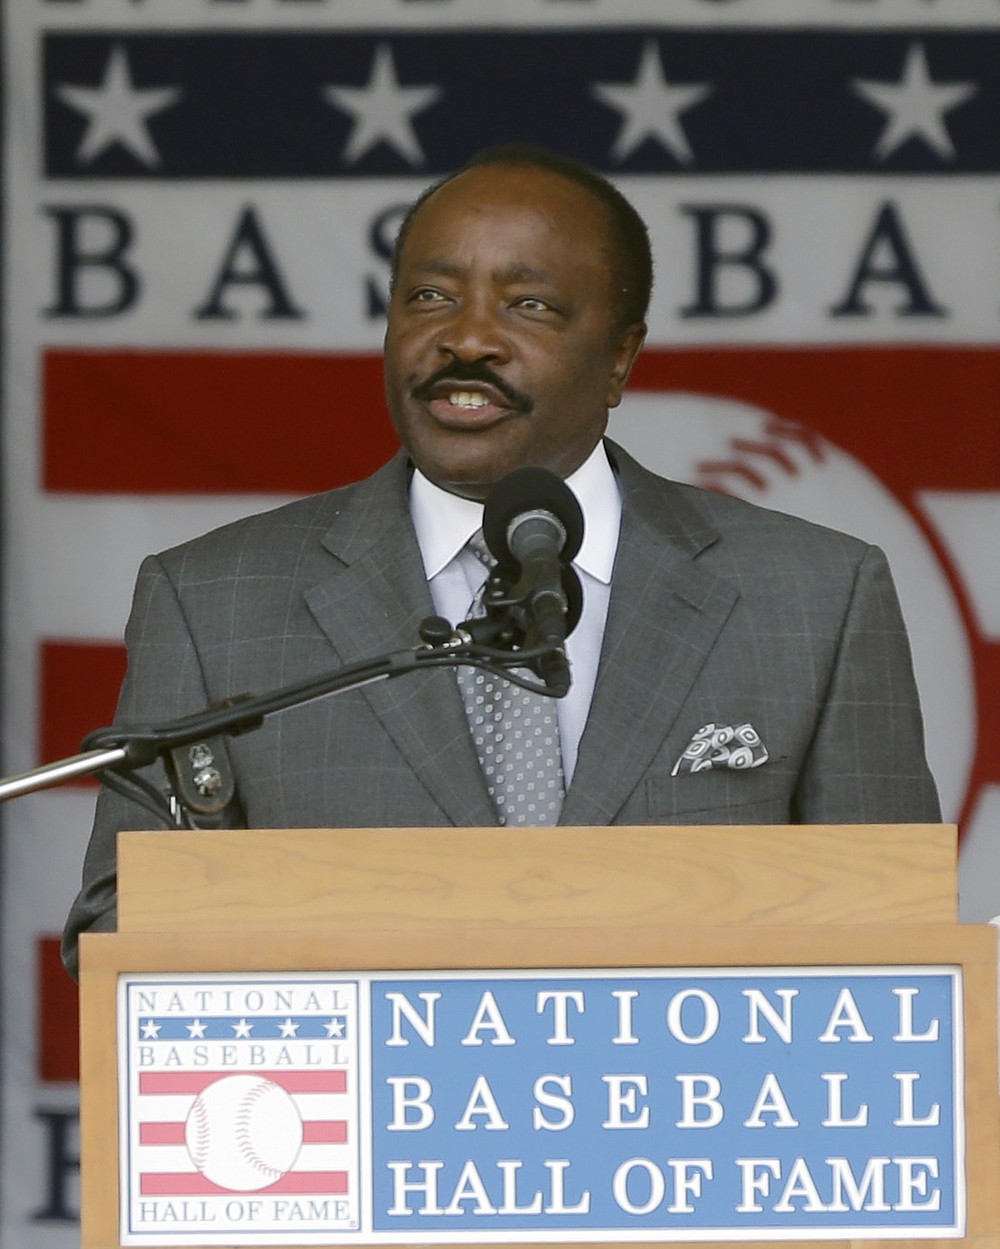 FILE - In this July 28, 2013, file photo, Baseball Hall of Famer Joe Morgan speaks during ceremonies in Cooperstown, N.Y. Joe Morgan has died. A family spokesman says he died at his home Sunday, Oct. 11, 2020, in Danville, Calif. (AP Photo/Mike Groll, File)